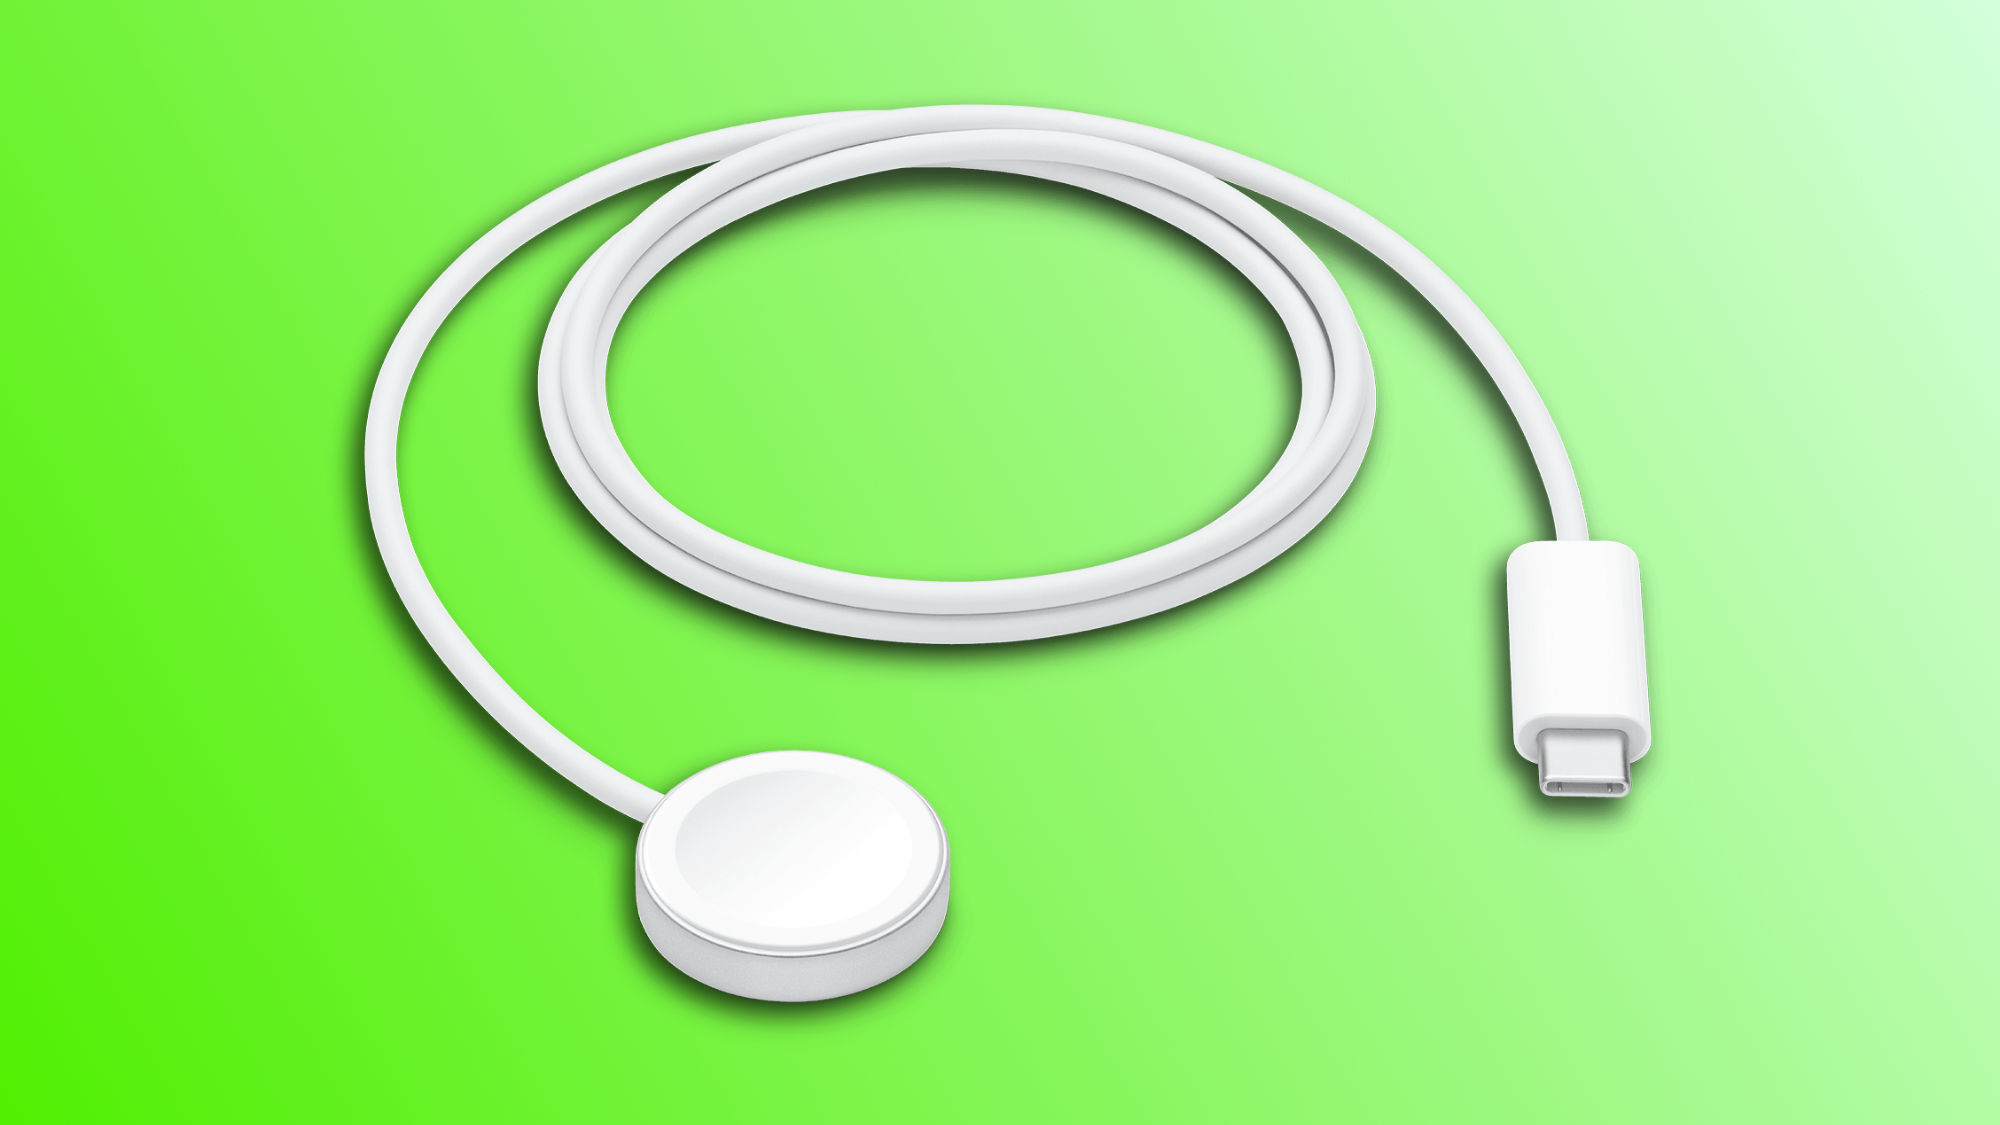 The importance of choosing certified chargers for the Apple Watch